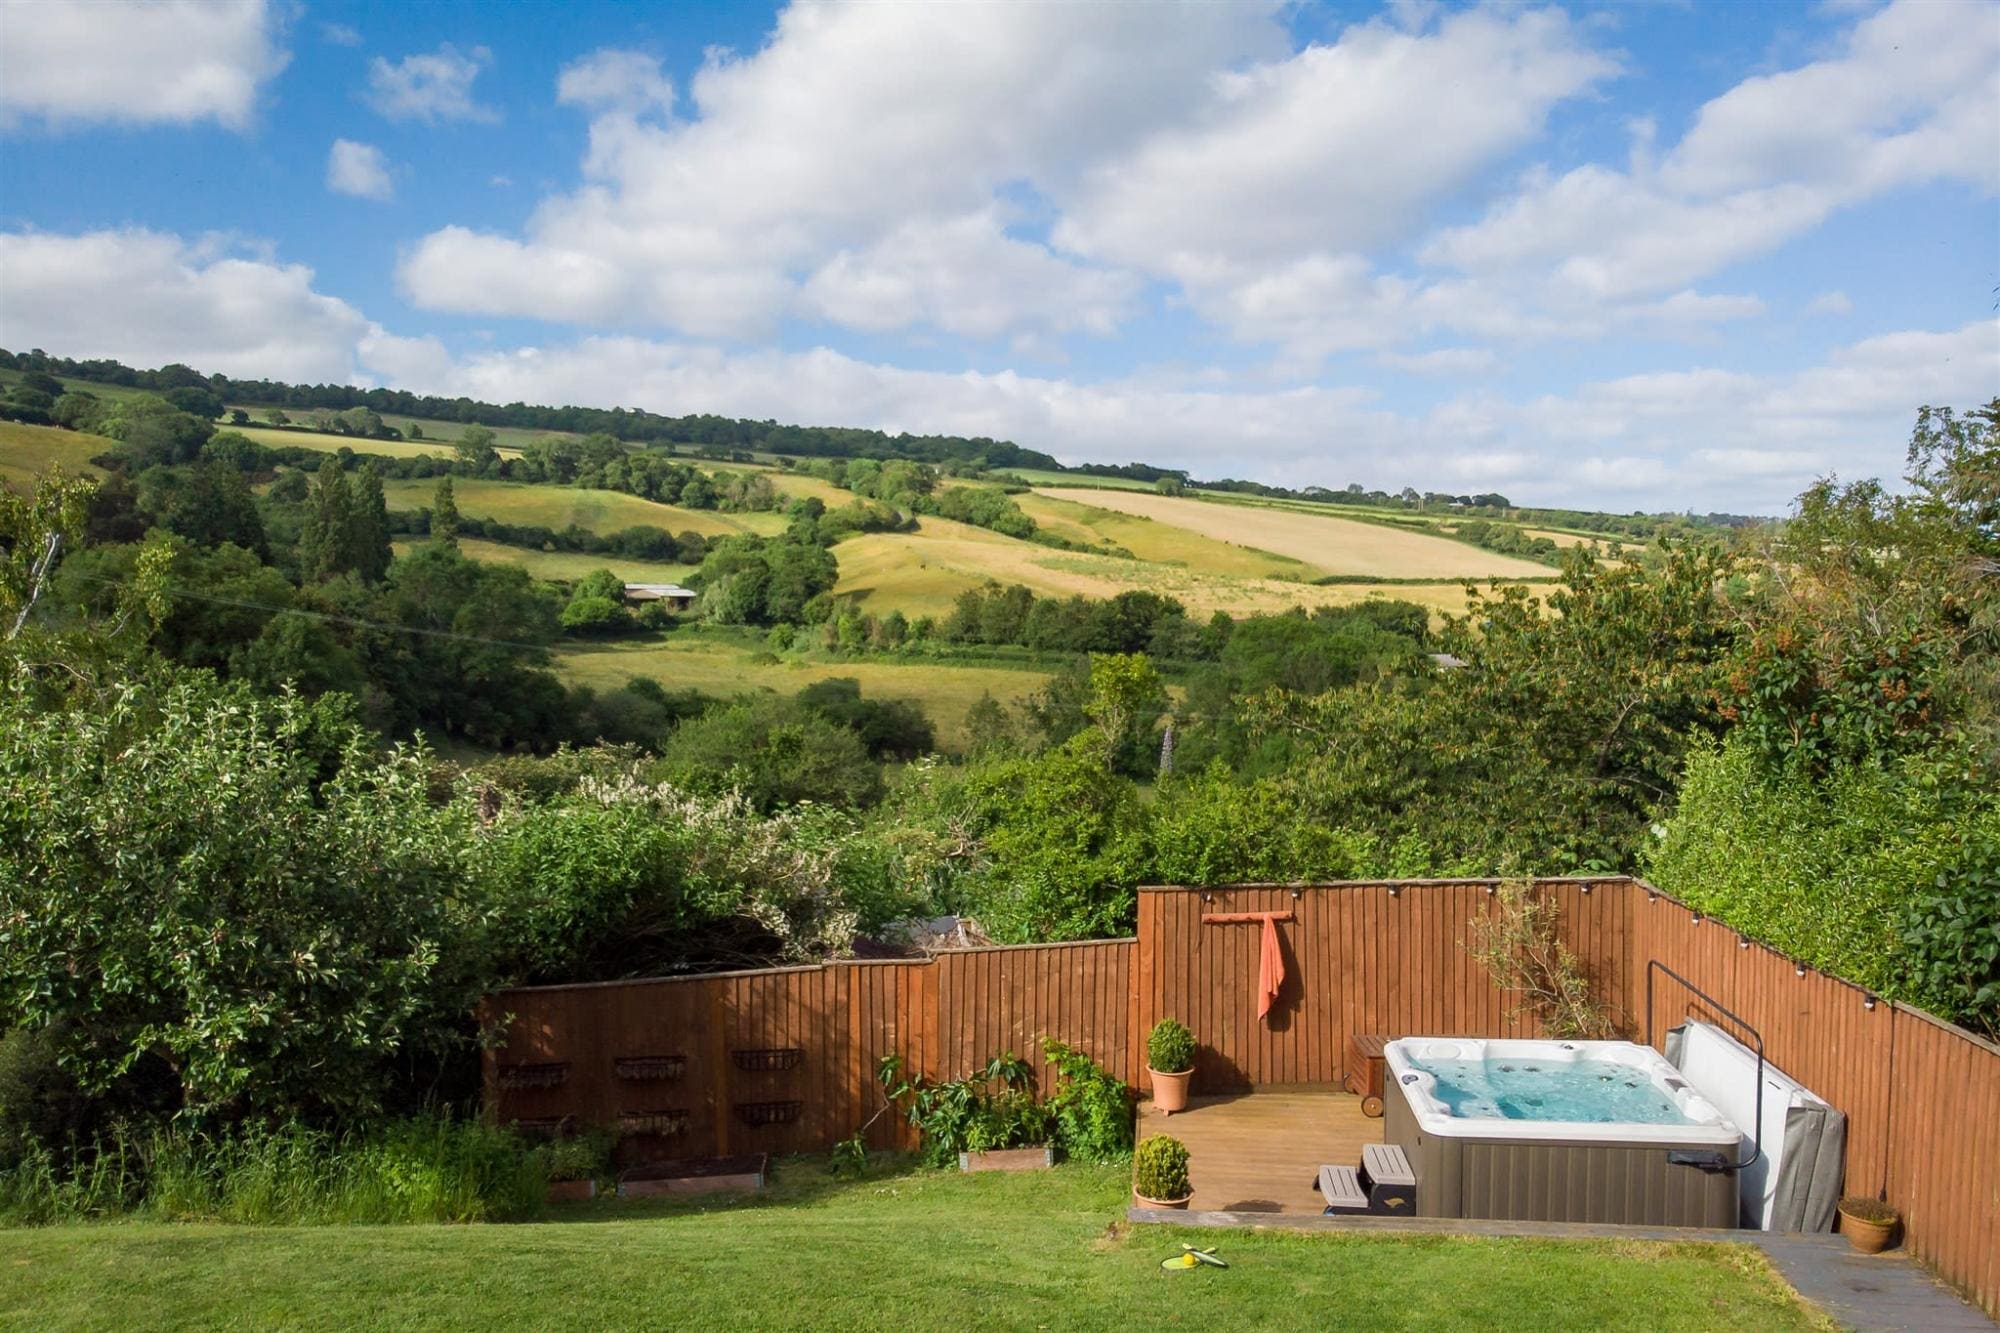 Property Image 2 - Haldon View - Characterful cottage boasts stunning countryside views and hot tub